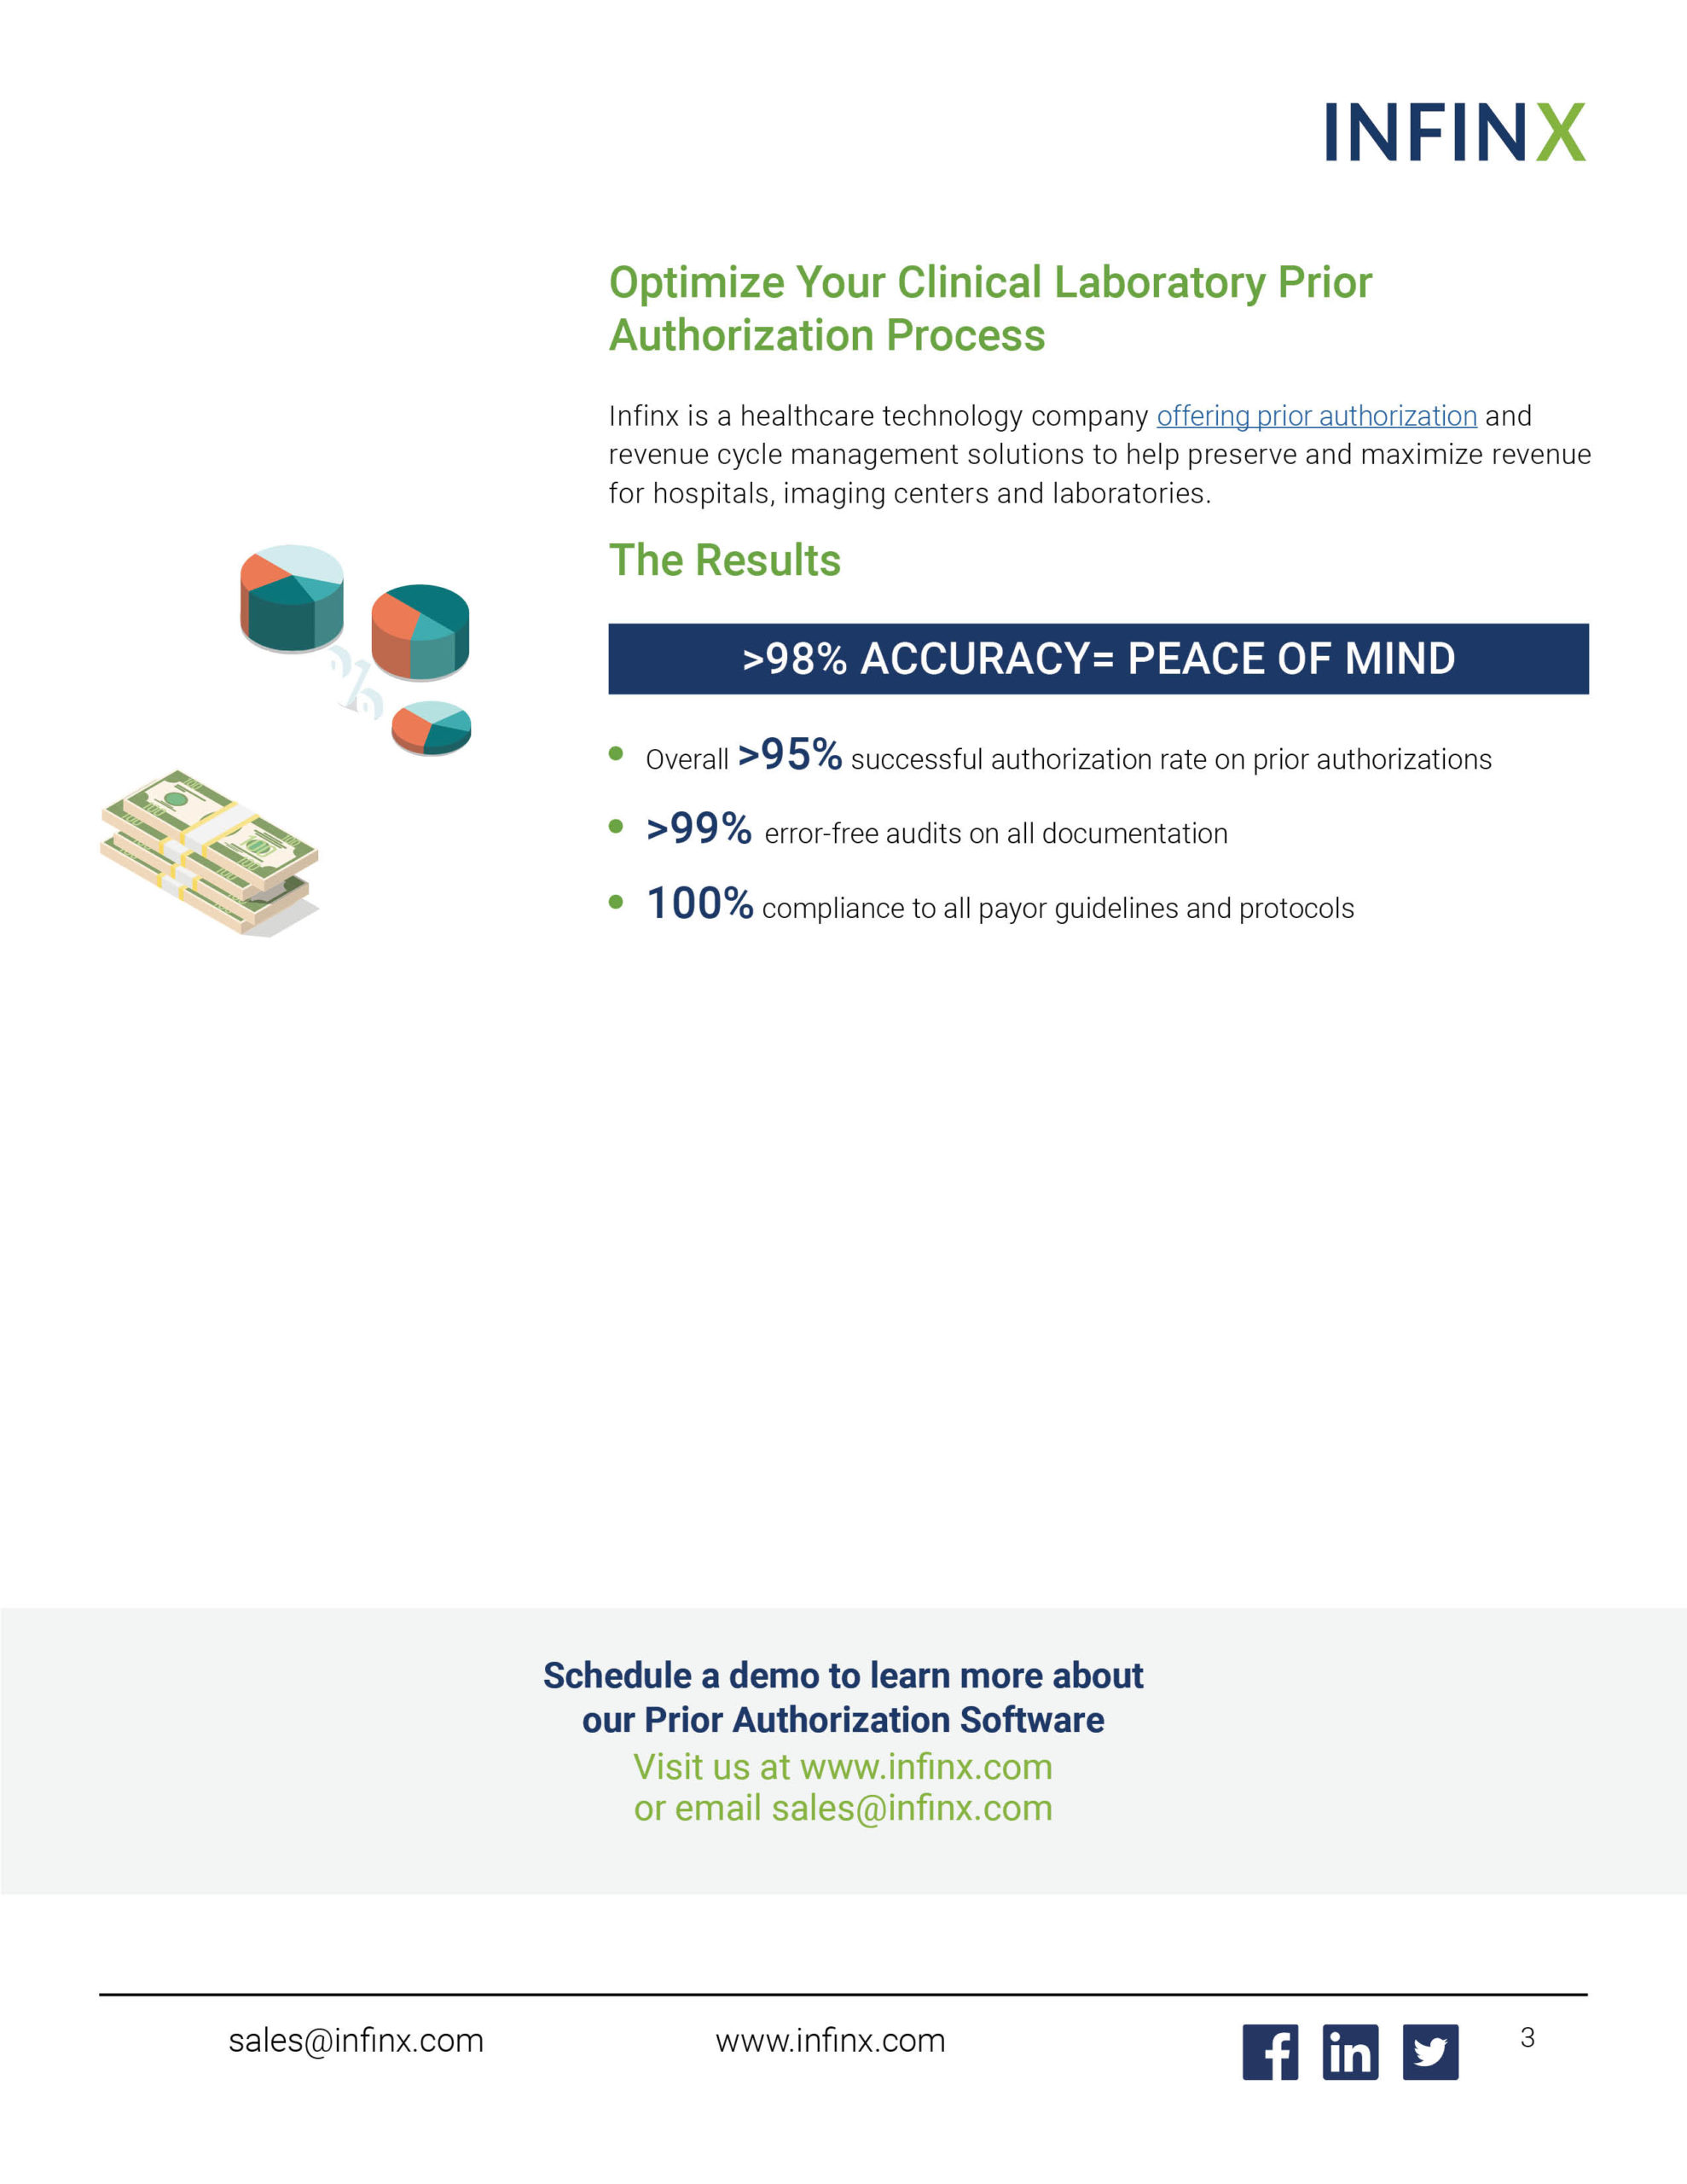 Infinx - Case Study - Prior Authorization Volume Quadrupled and Turnaround Times Slashed for National Clinical Laboratory - May2021 3